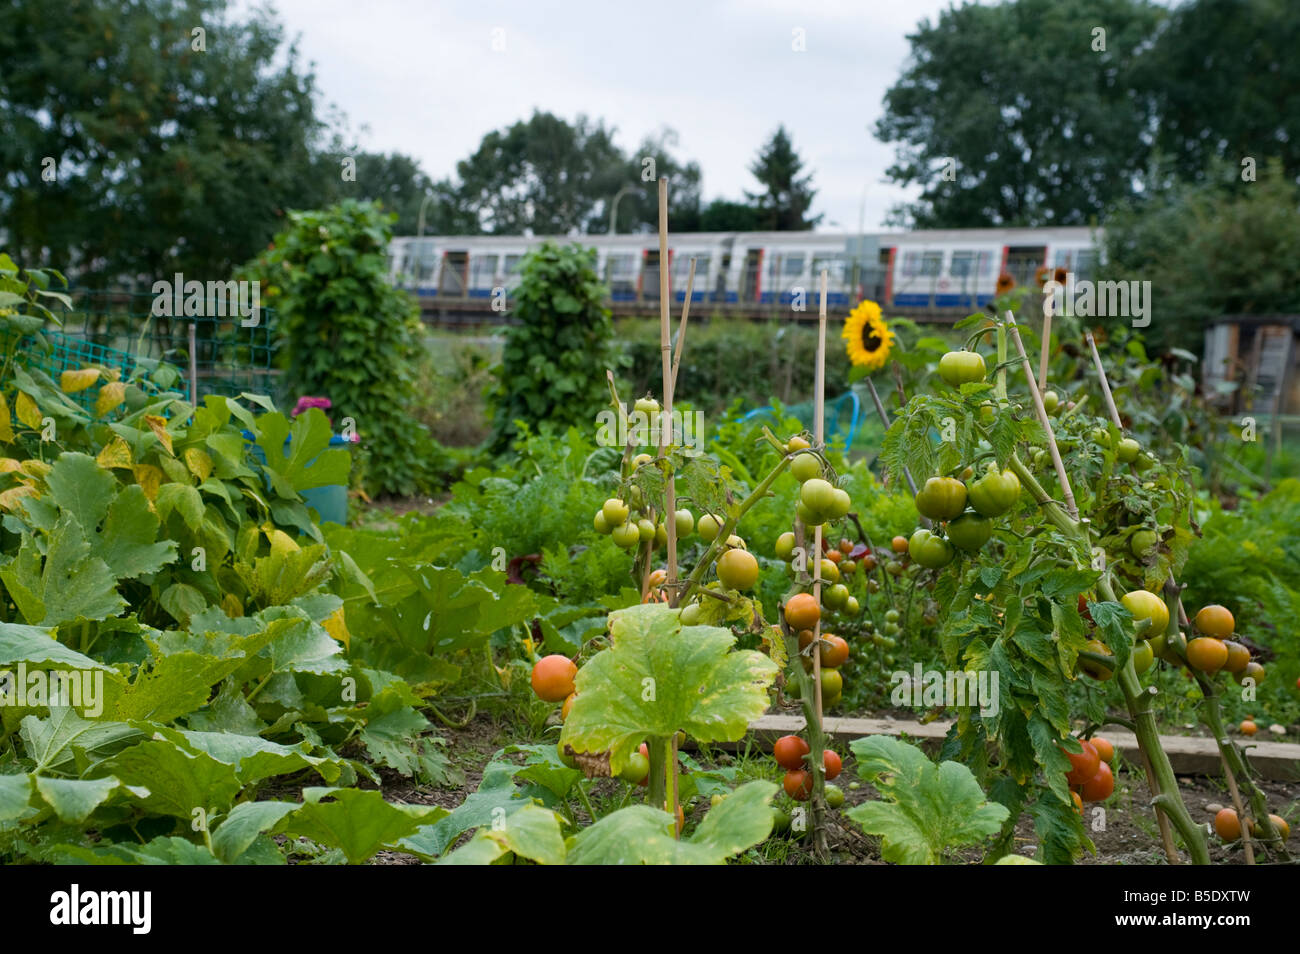 A tube train passes in the distance with the allotment in the front in Greater London, Harrow. Stock Photo